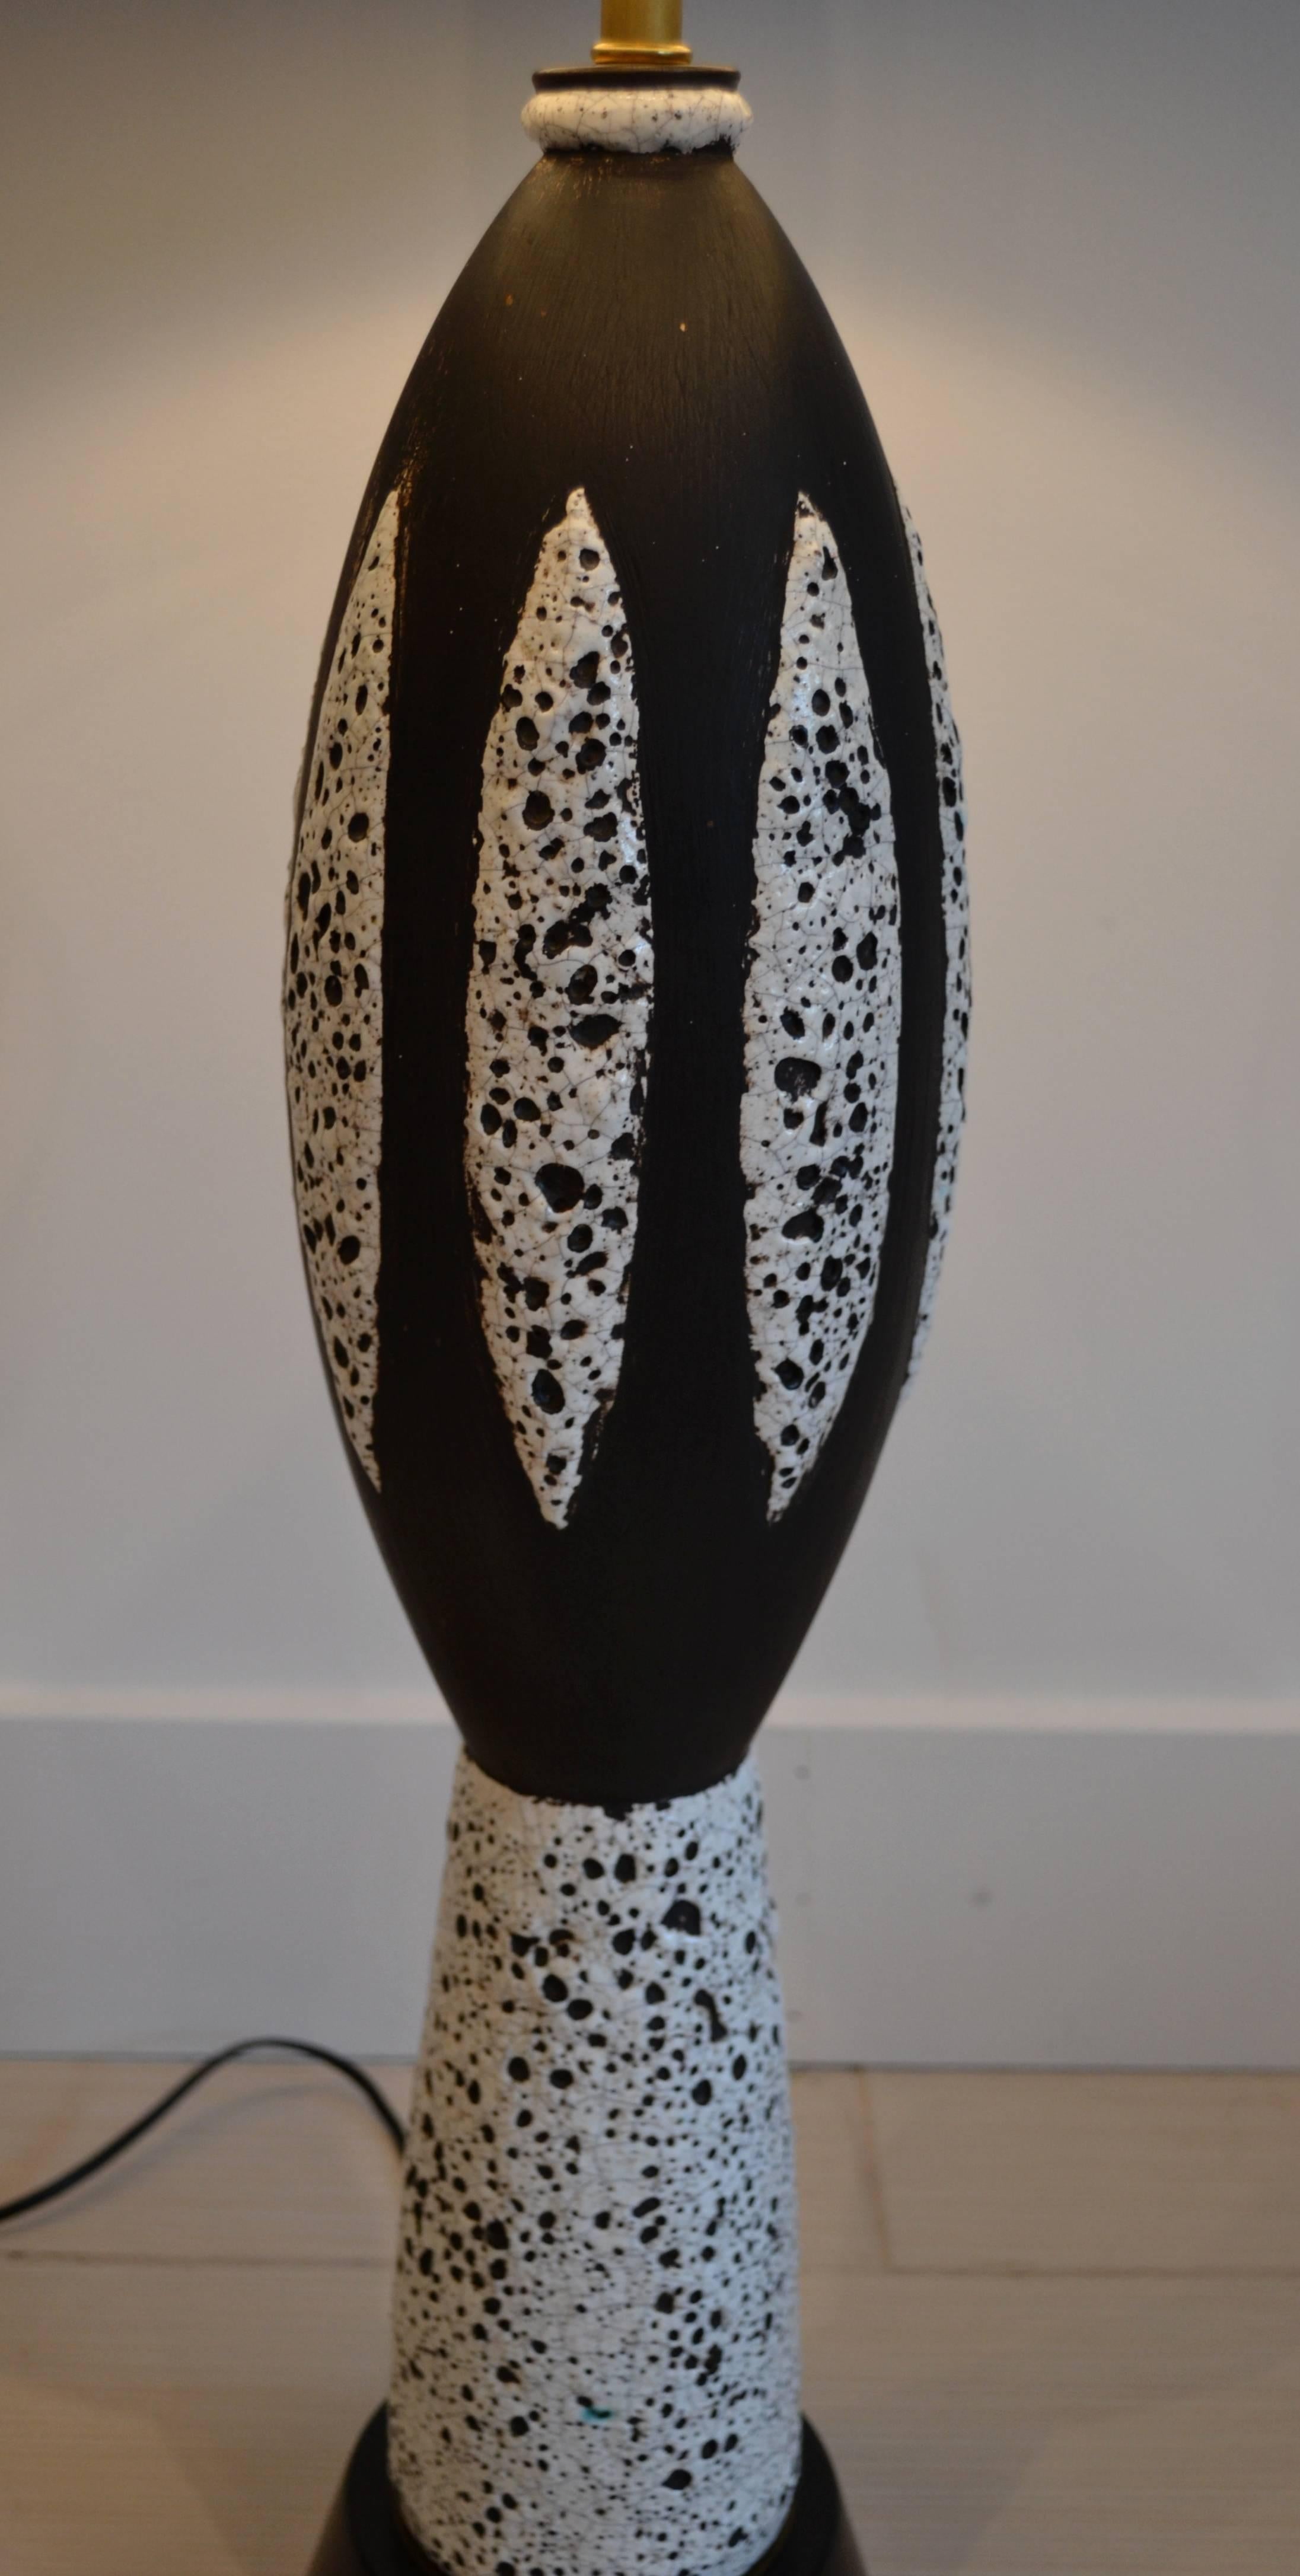 Super cool black and white spotted ceramic table lamp, mat finish, 33 inches to top of socket, professionally rewired.